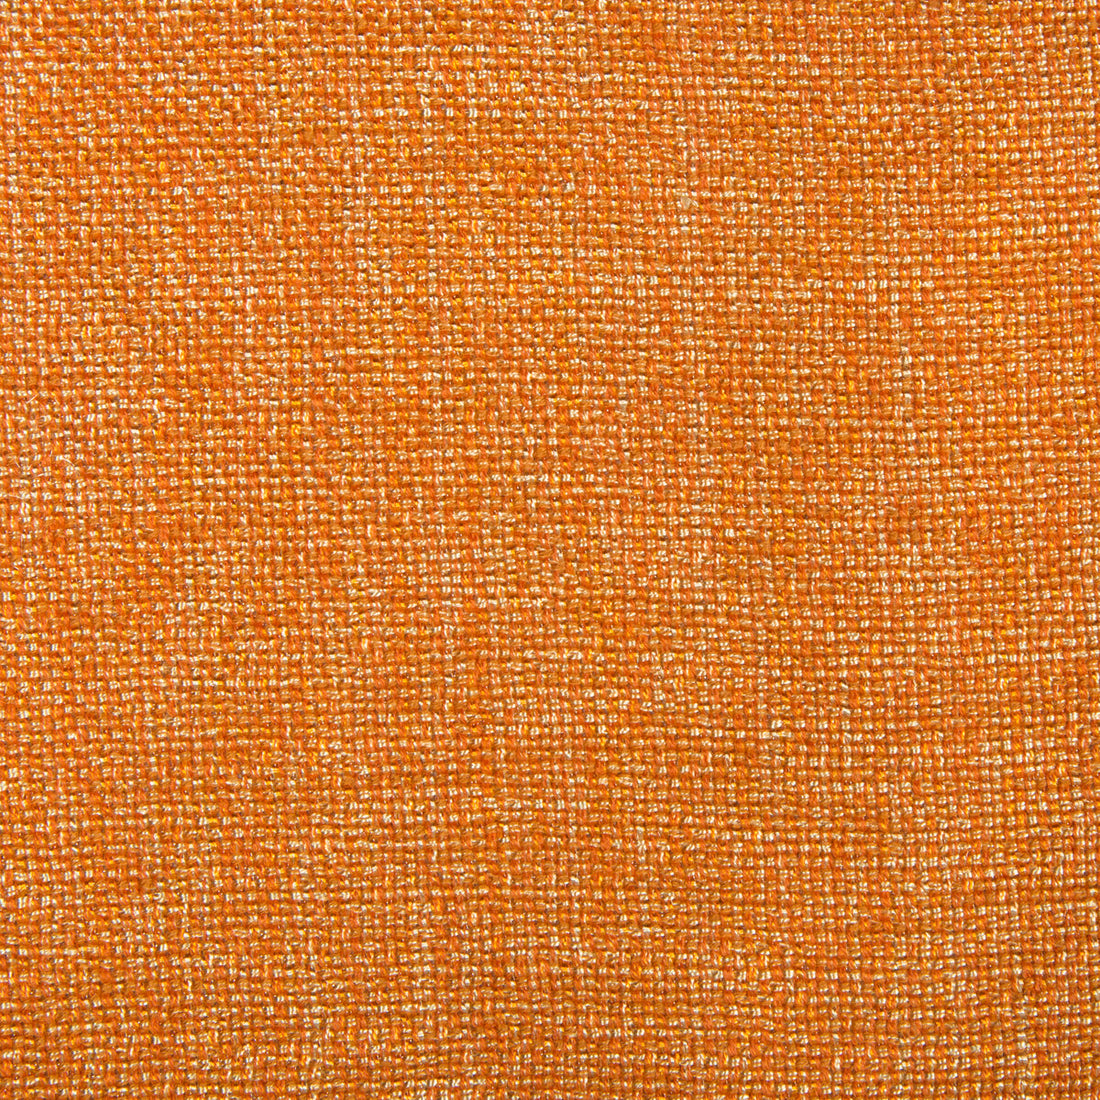 Kravet Contract fabric in 4458-112 color - pattern 4458.112.0 - by Kravet Contract